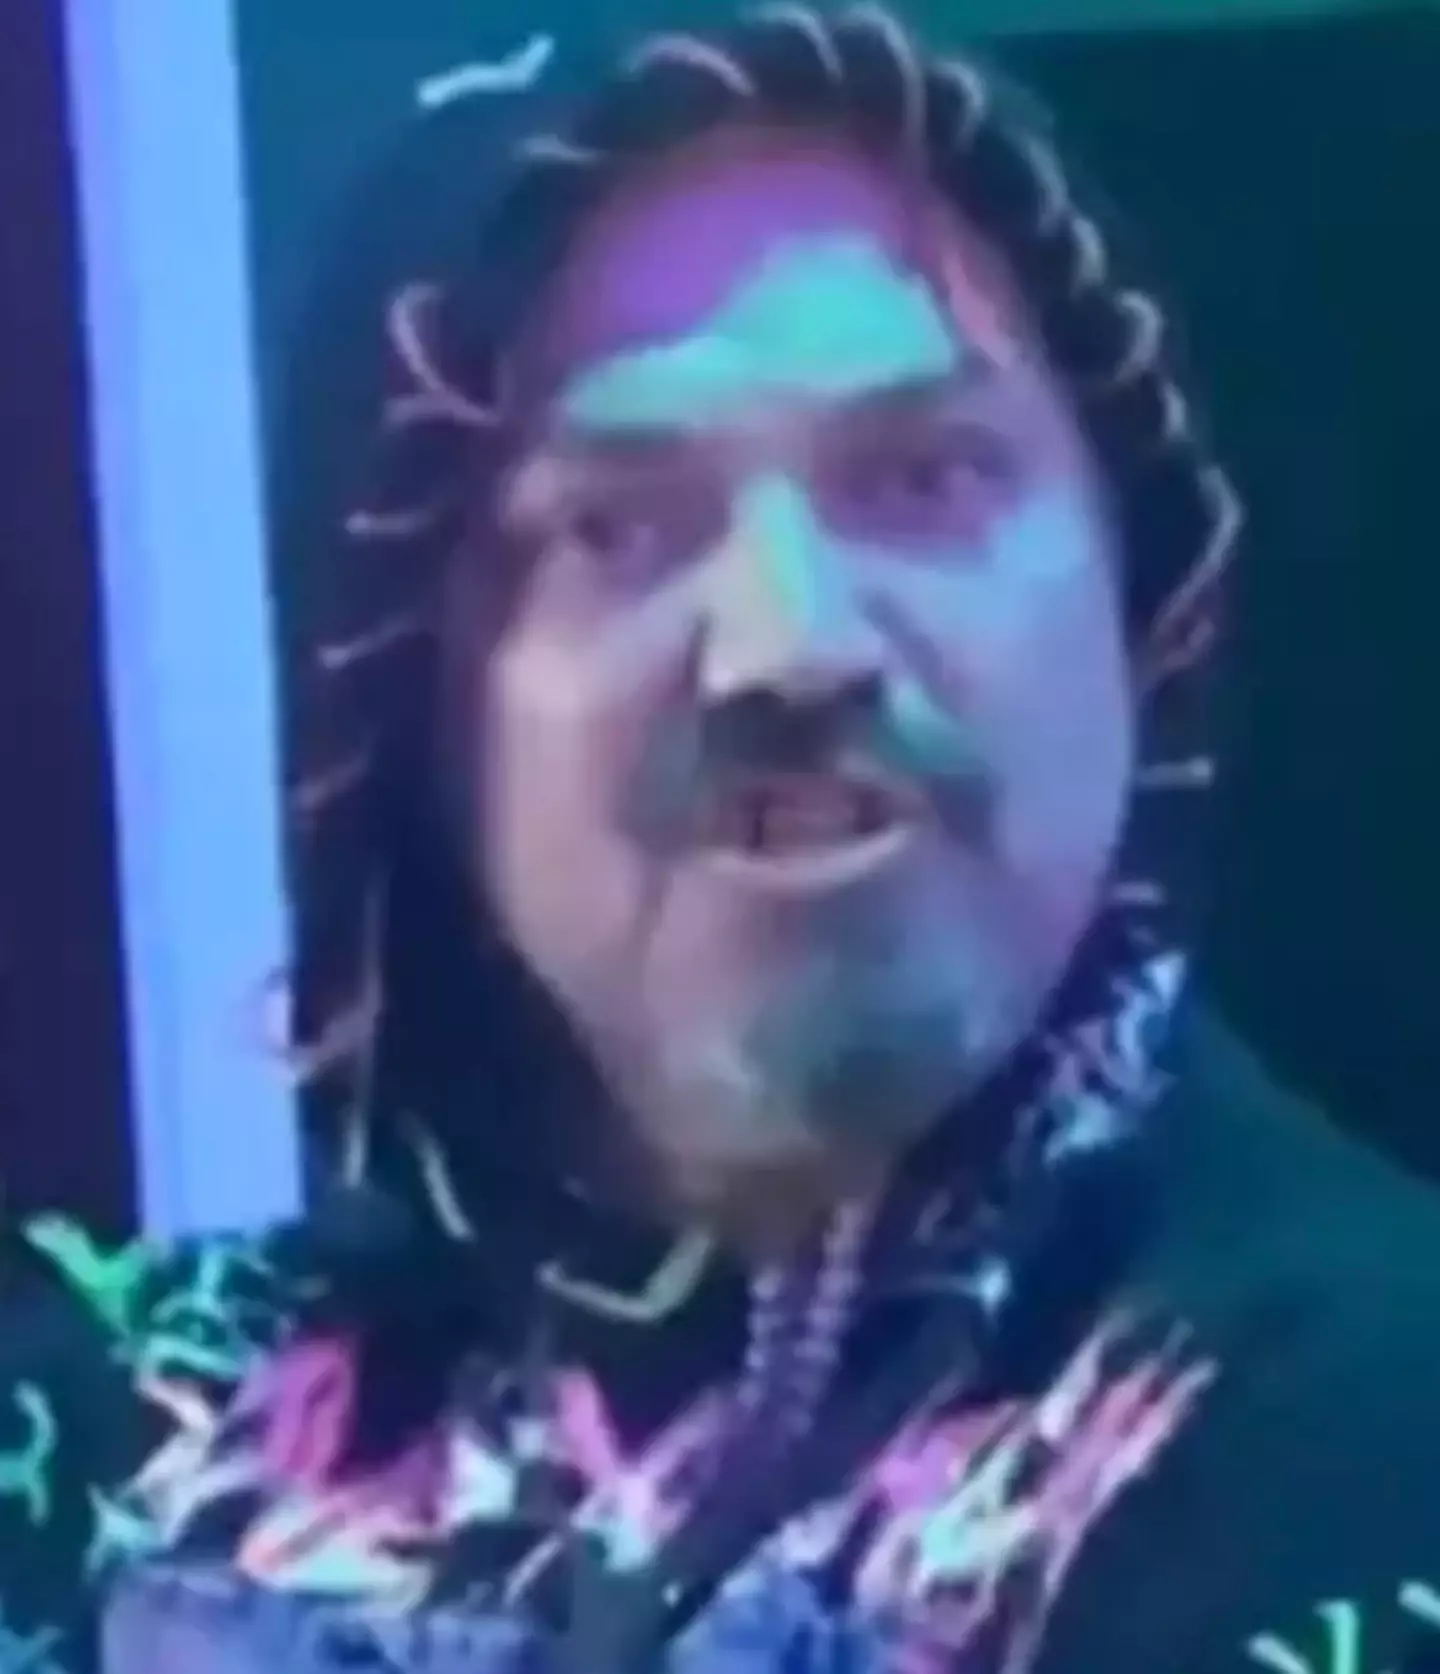 Bam Margera was seen in a music studio recording a diss track.